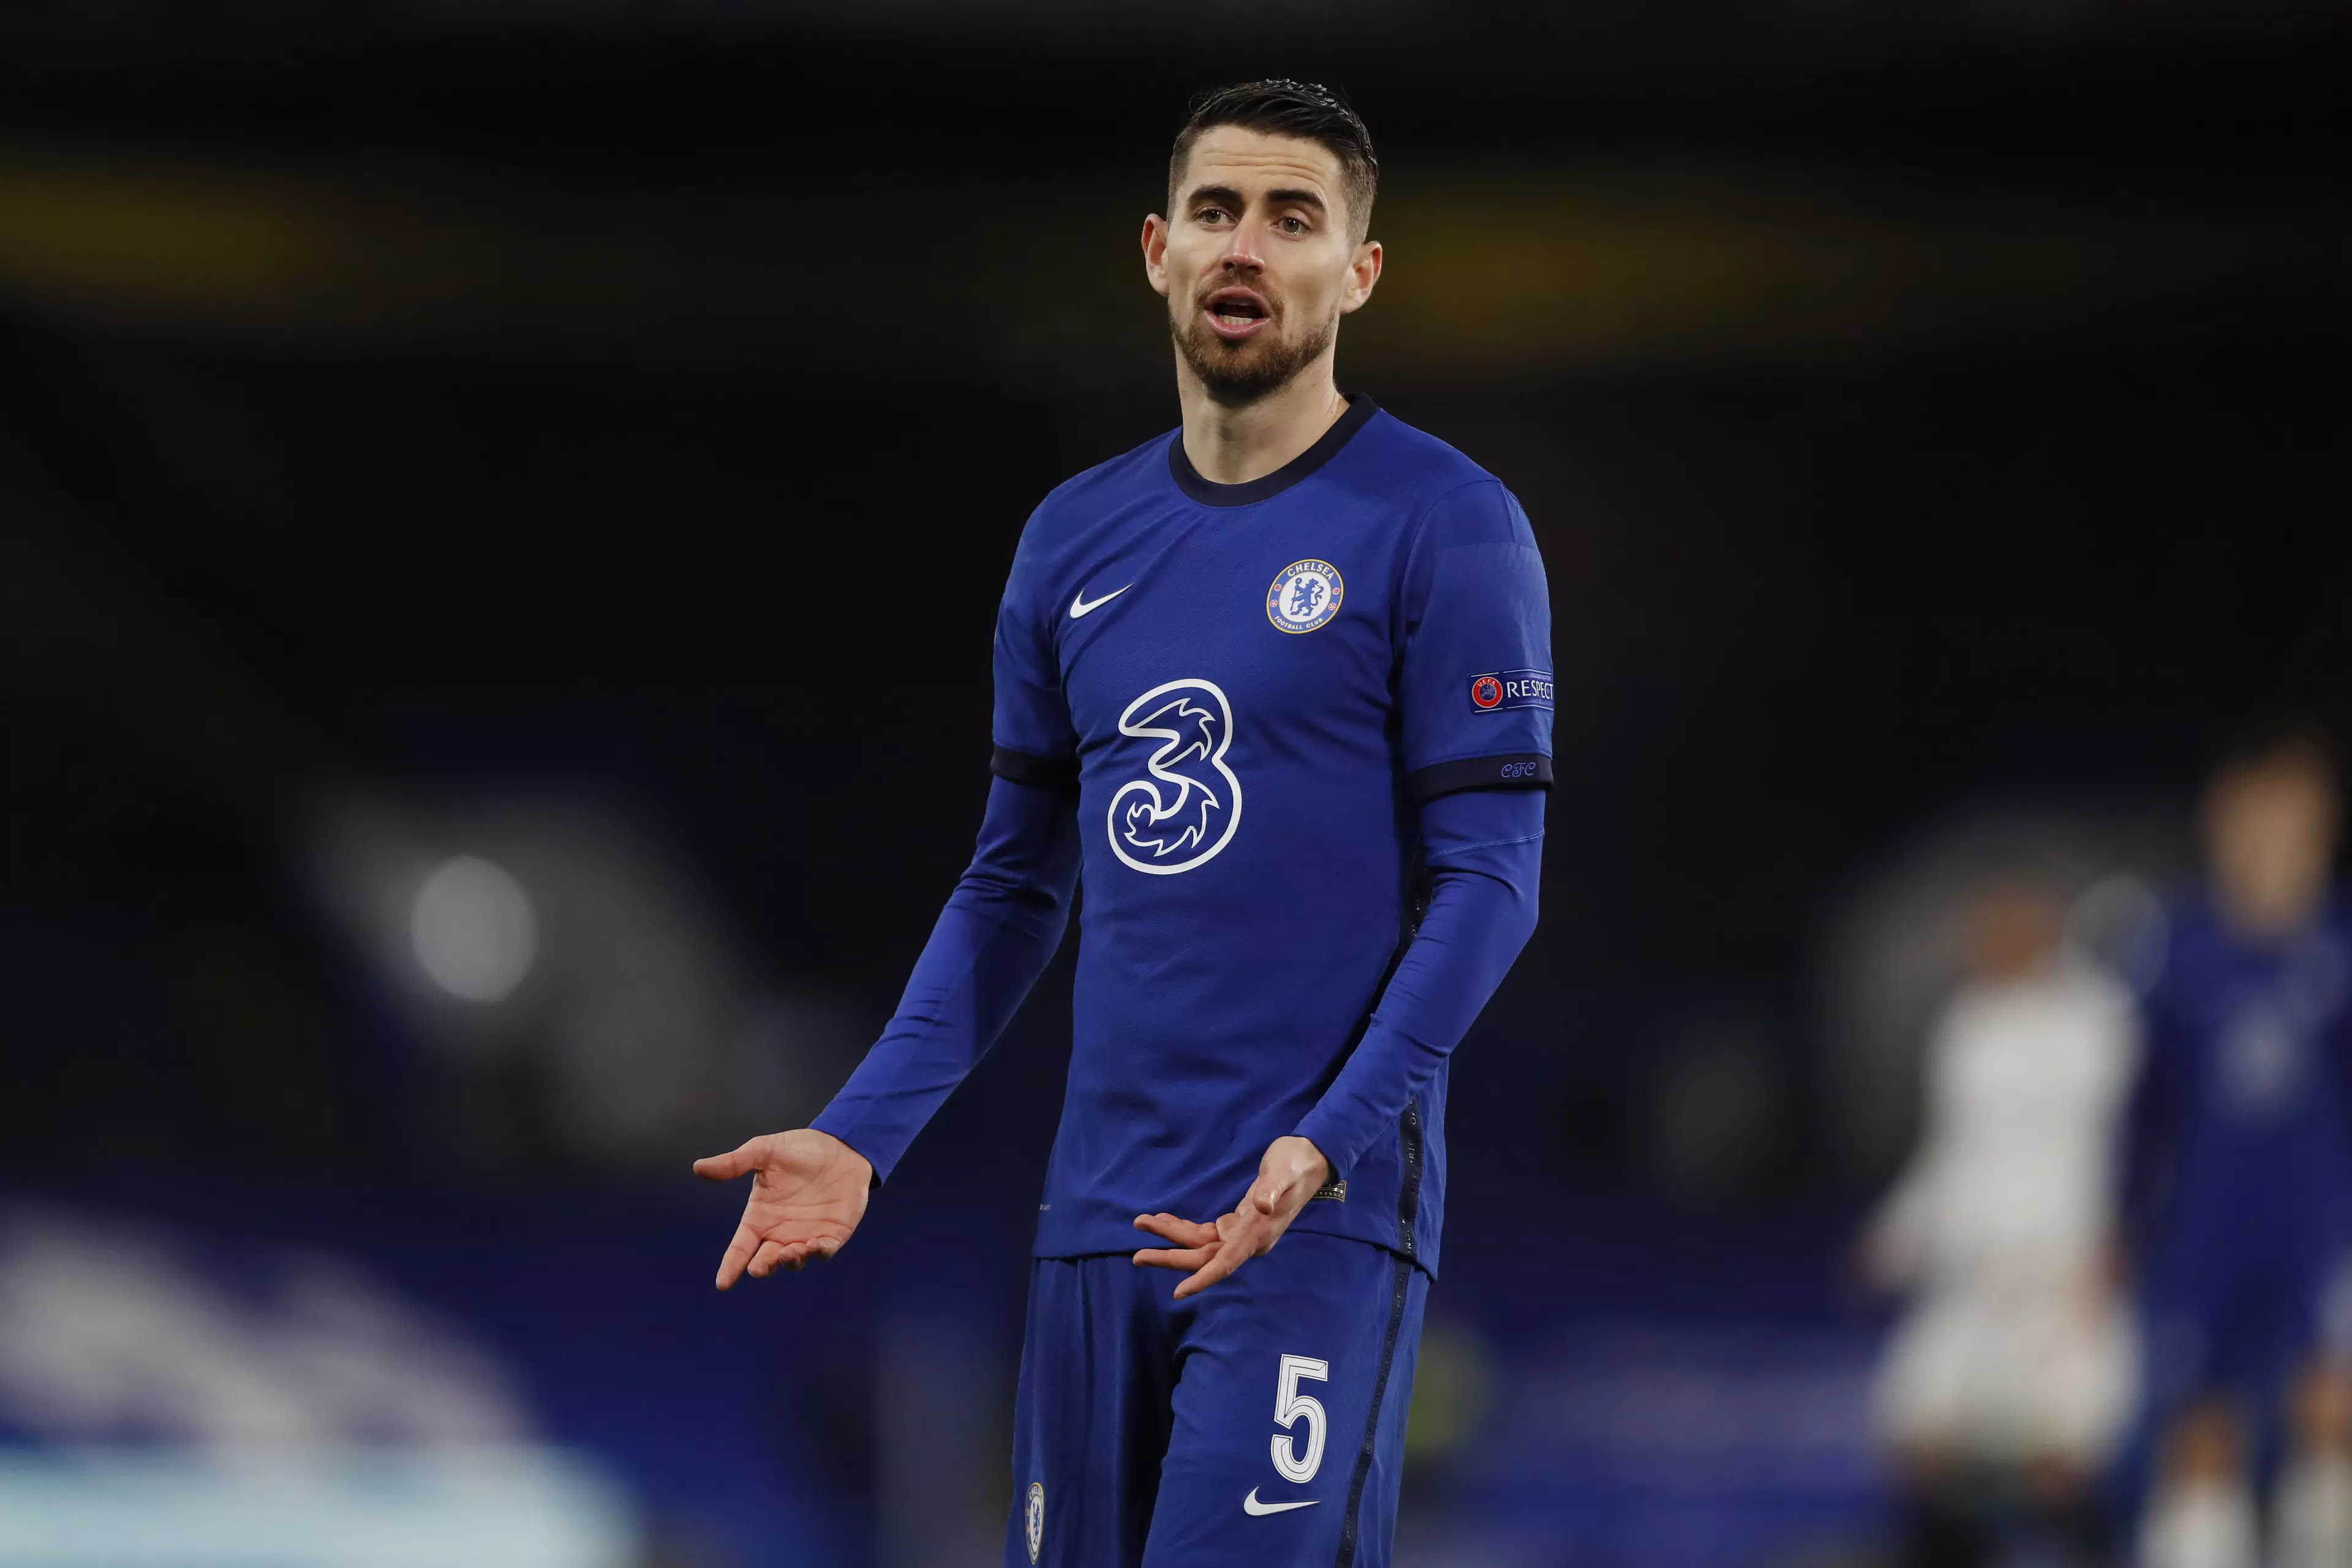 Jorginho has been booked in each of the last three matches that he has started against the Foxes